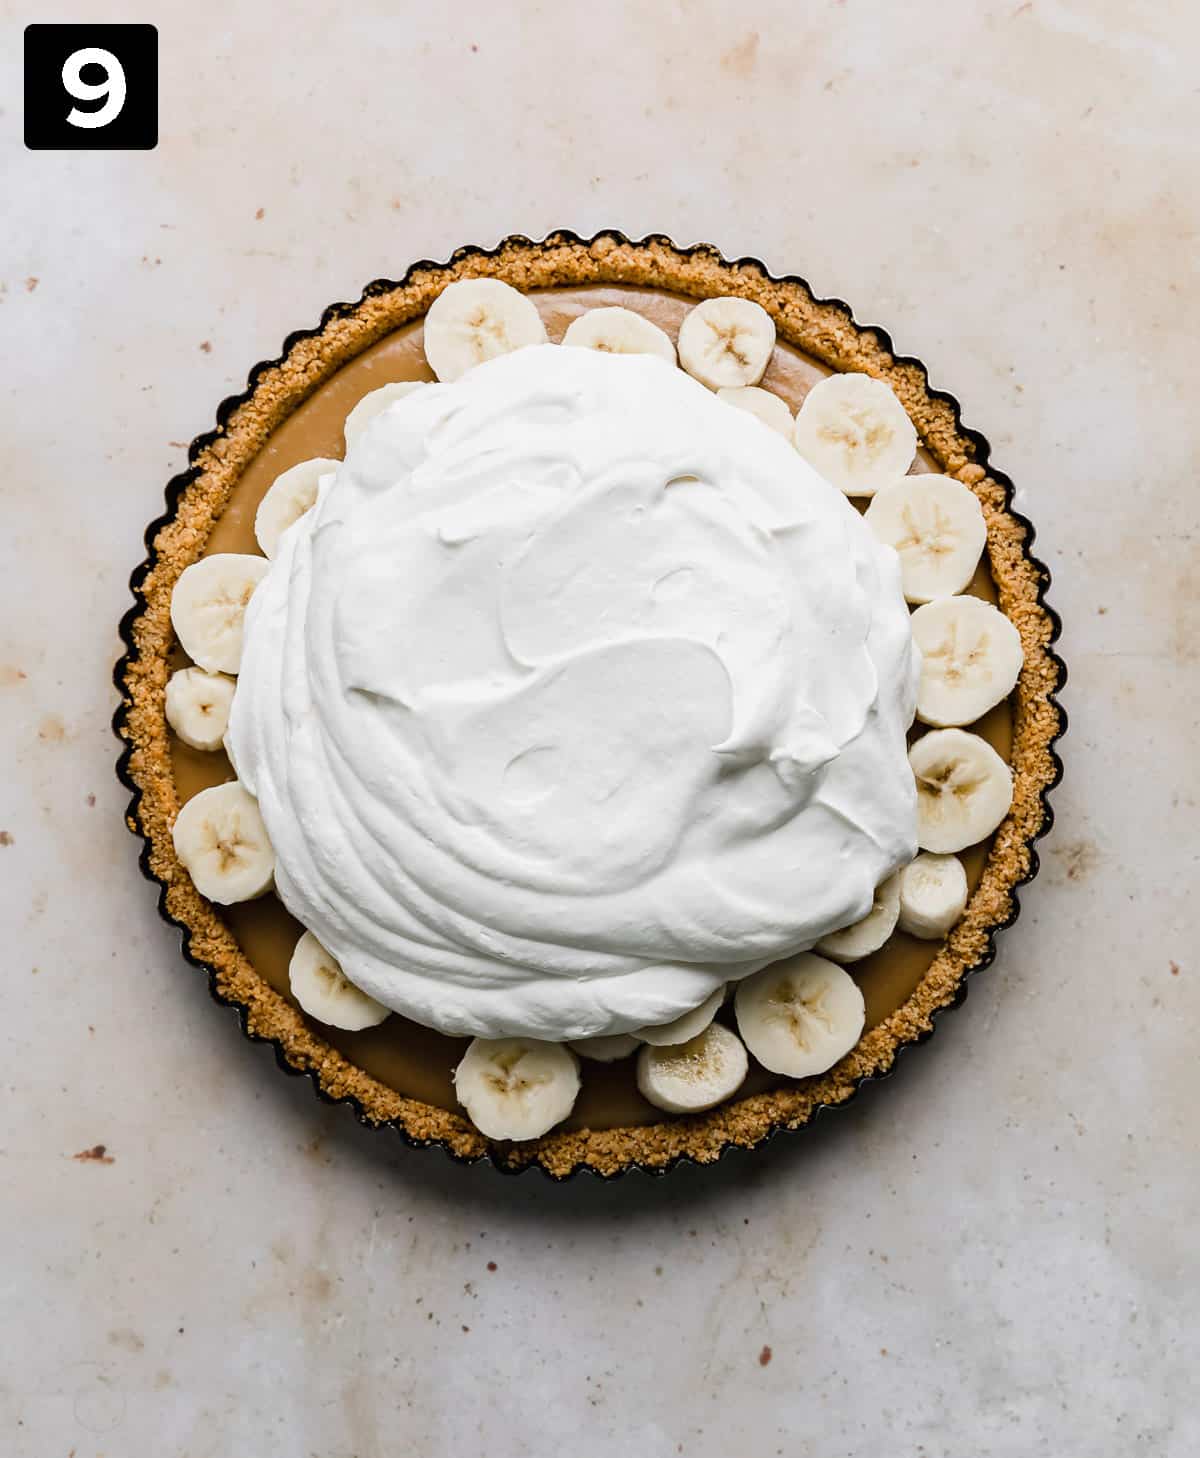 A Banoffee Pie topped with whipped cream.